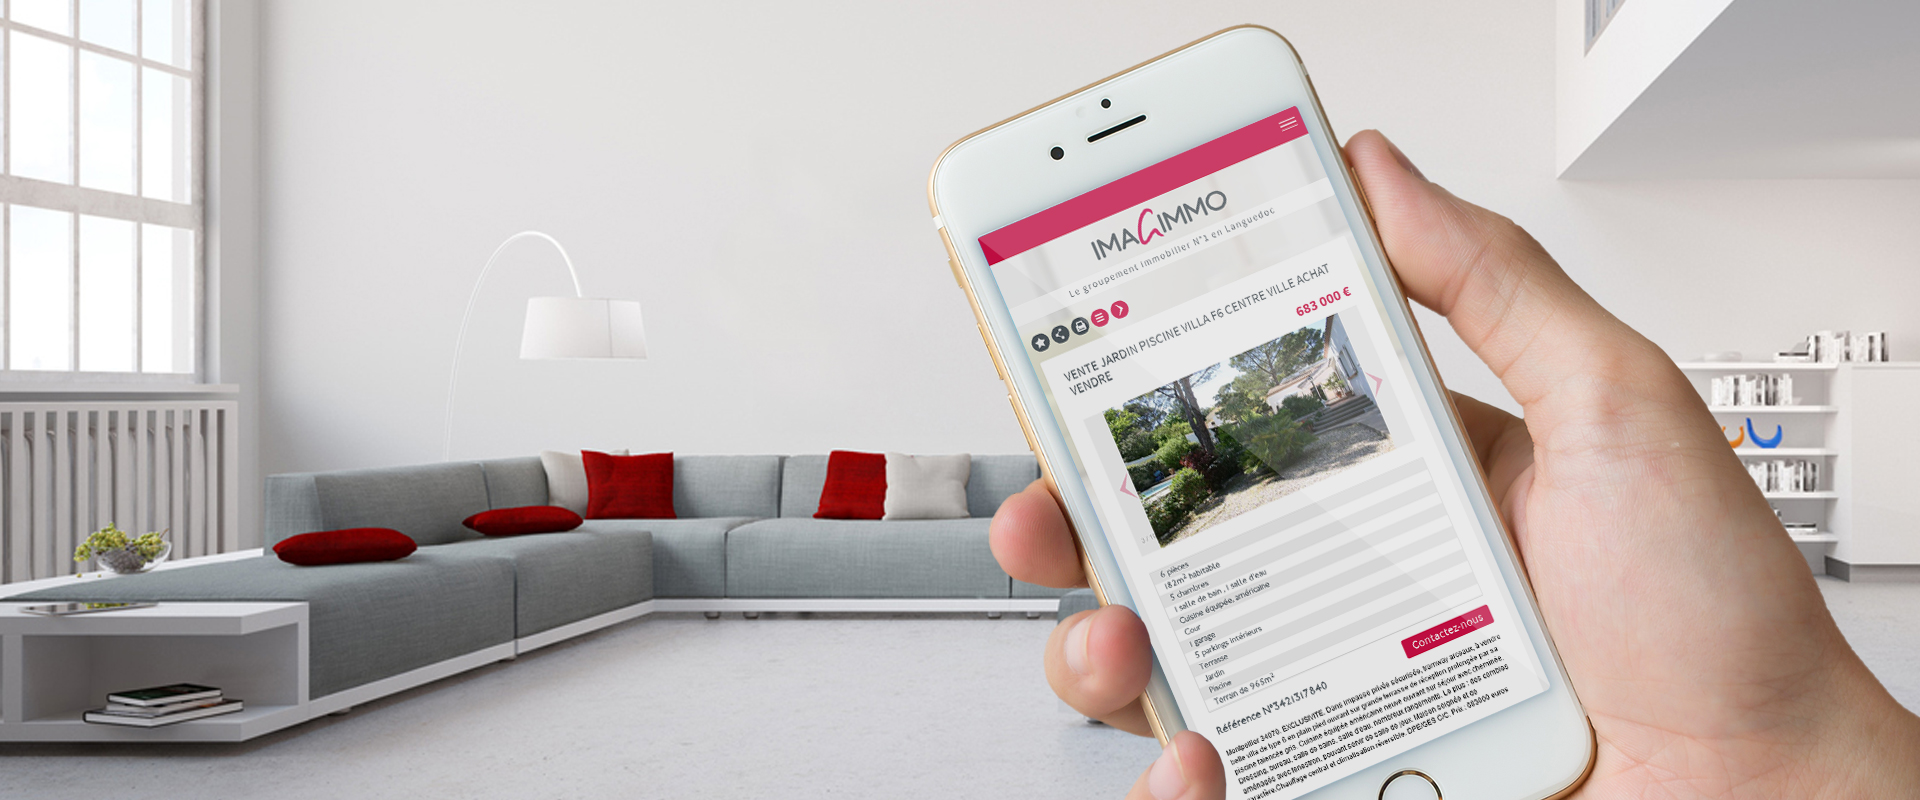 Site immobilier compatible mobile